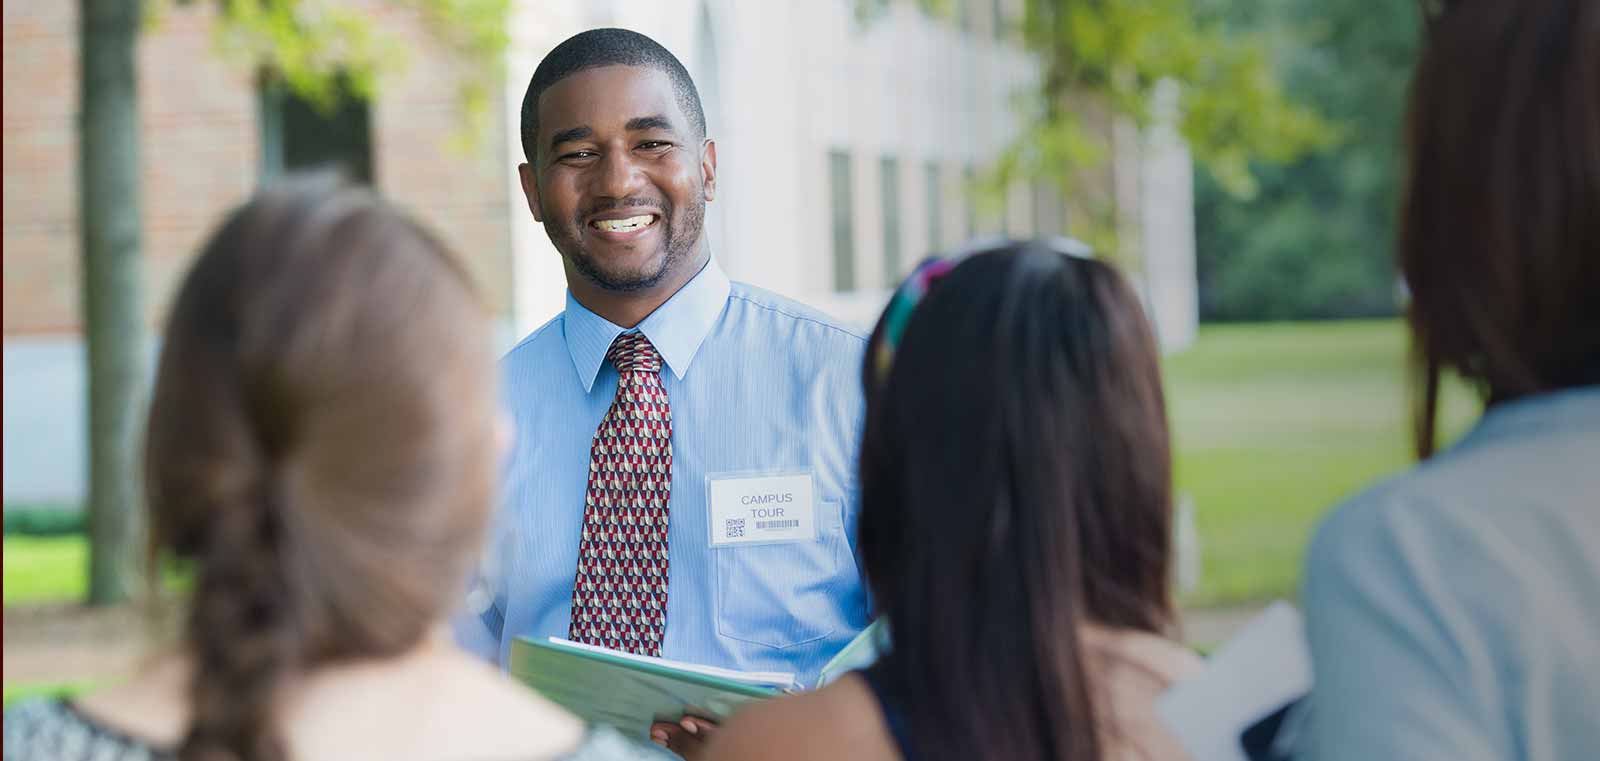 Schedule College Rep Visits with Ease